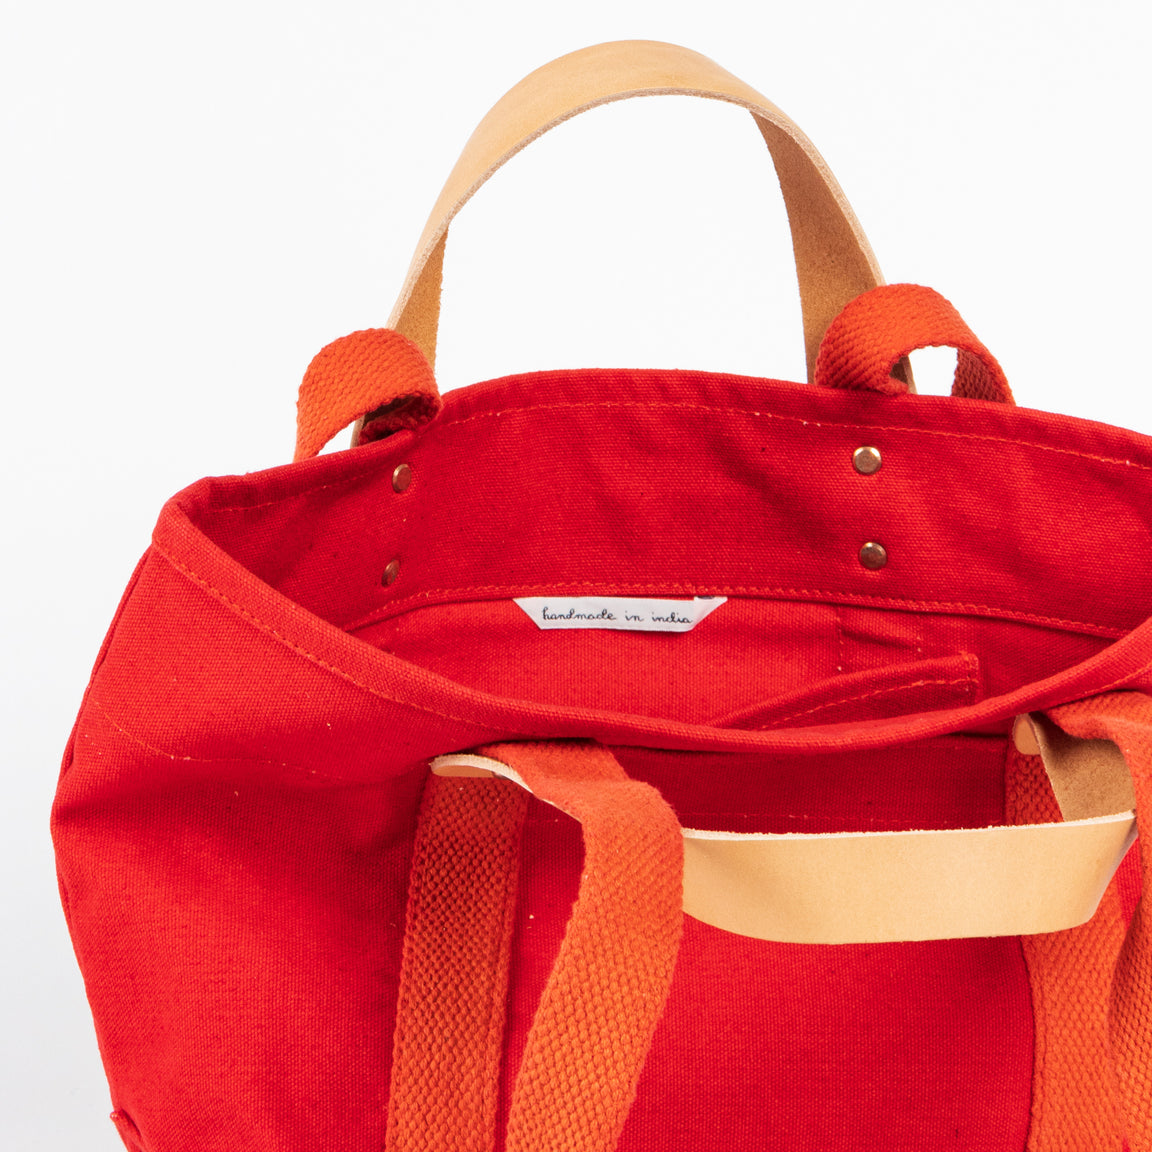 Lunch Tote - Persimmon